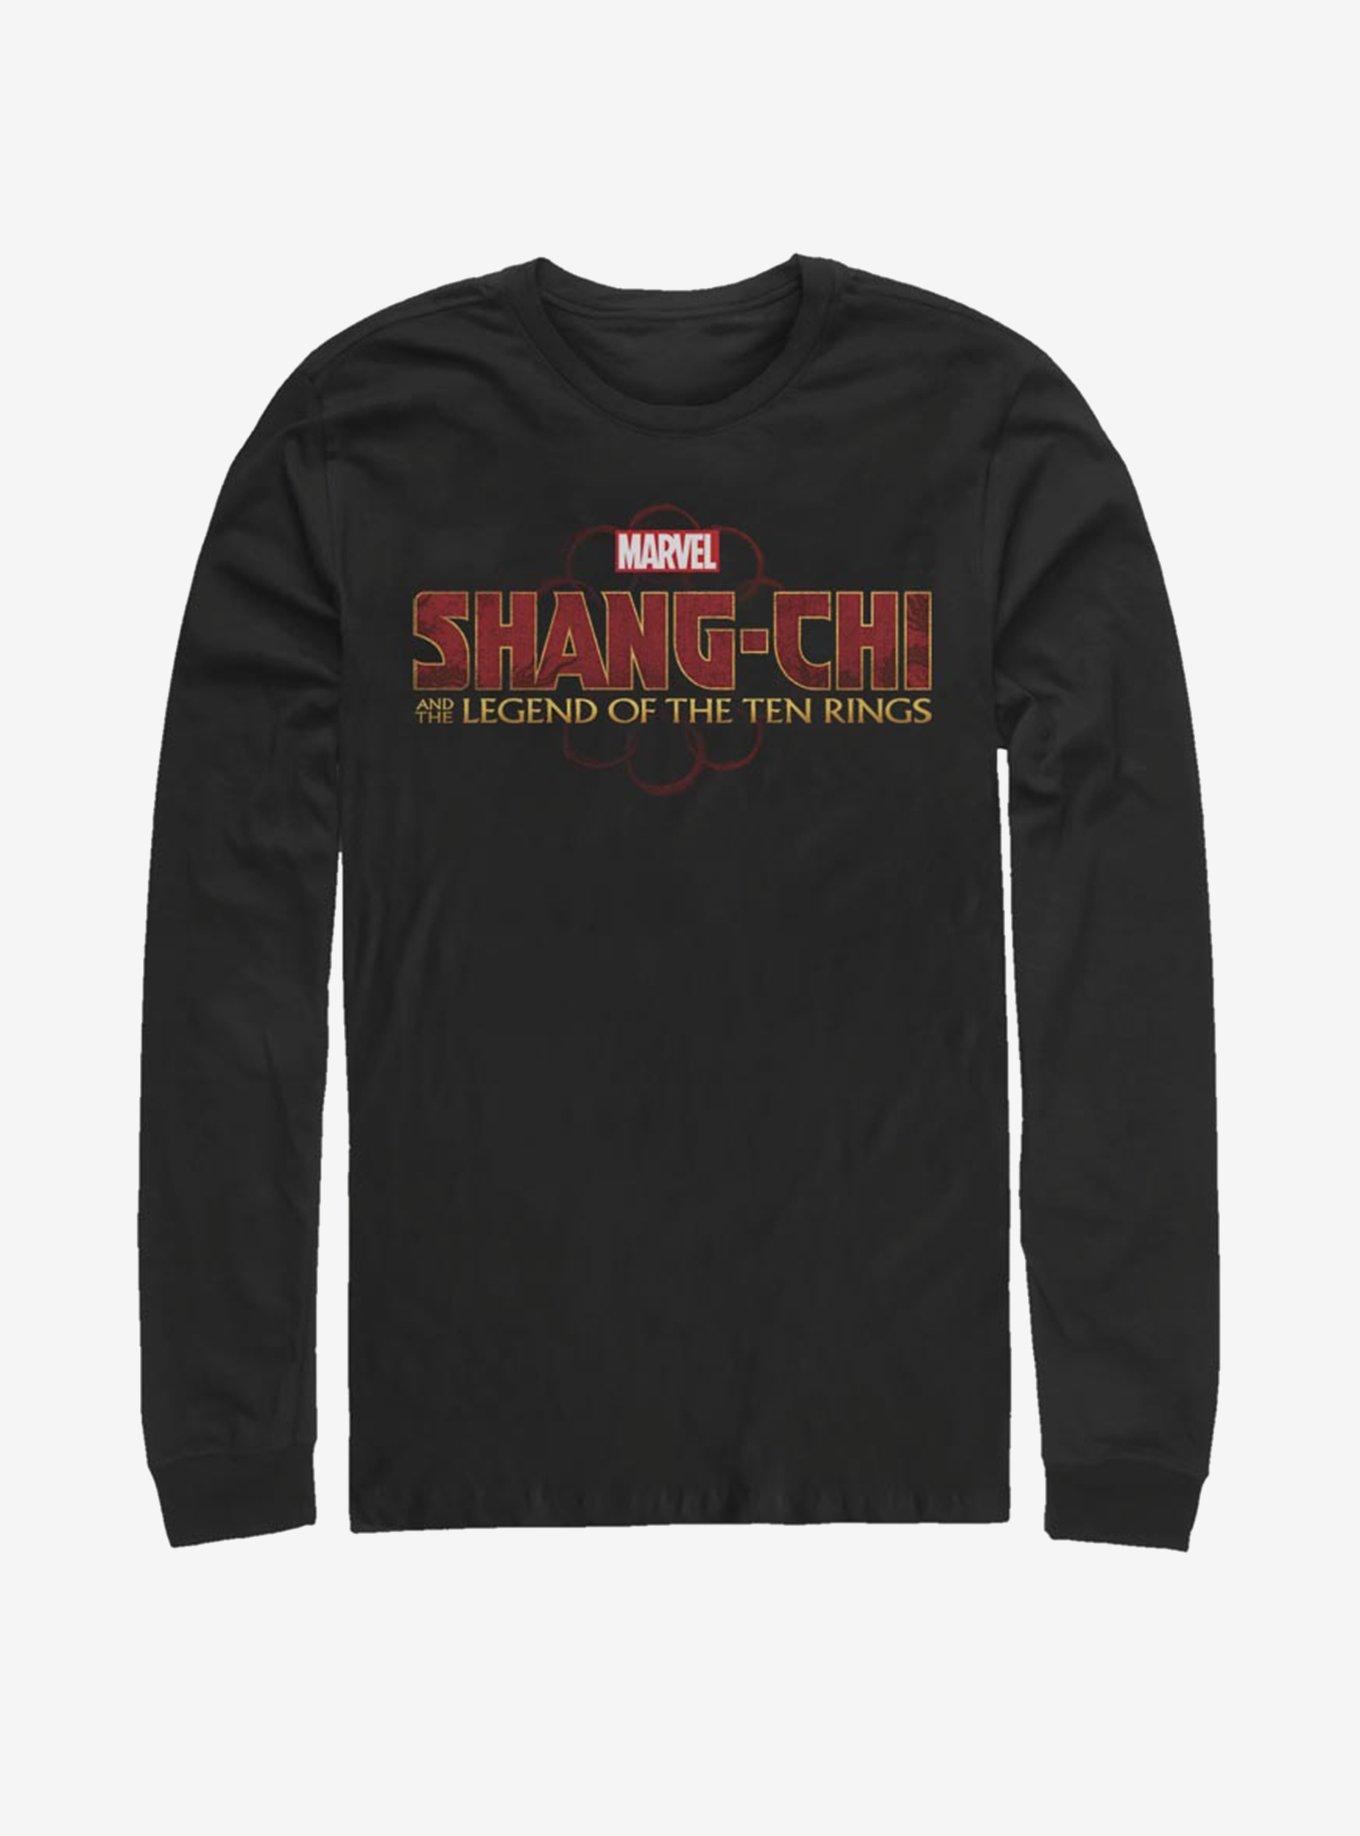 Marvel Shang-Chi And The Legend Of The Ten Rings Long-Sleeve T-Shirt, , hi-res